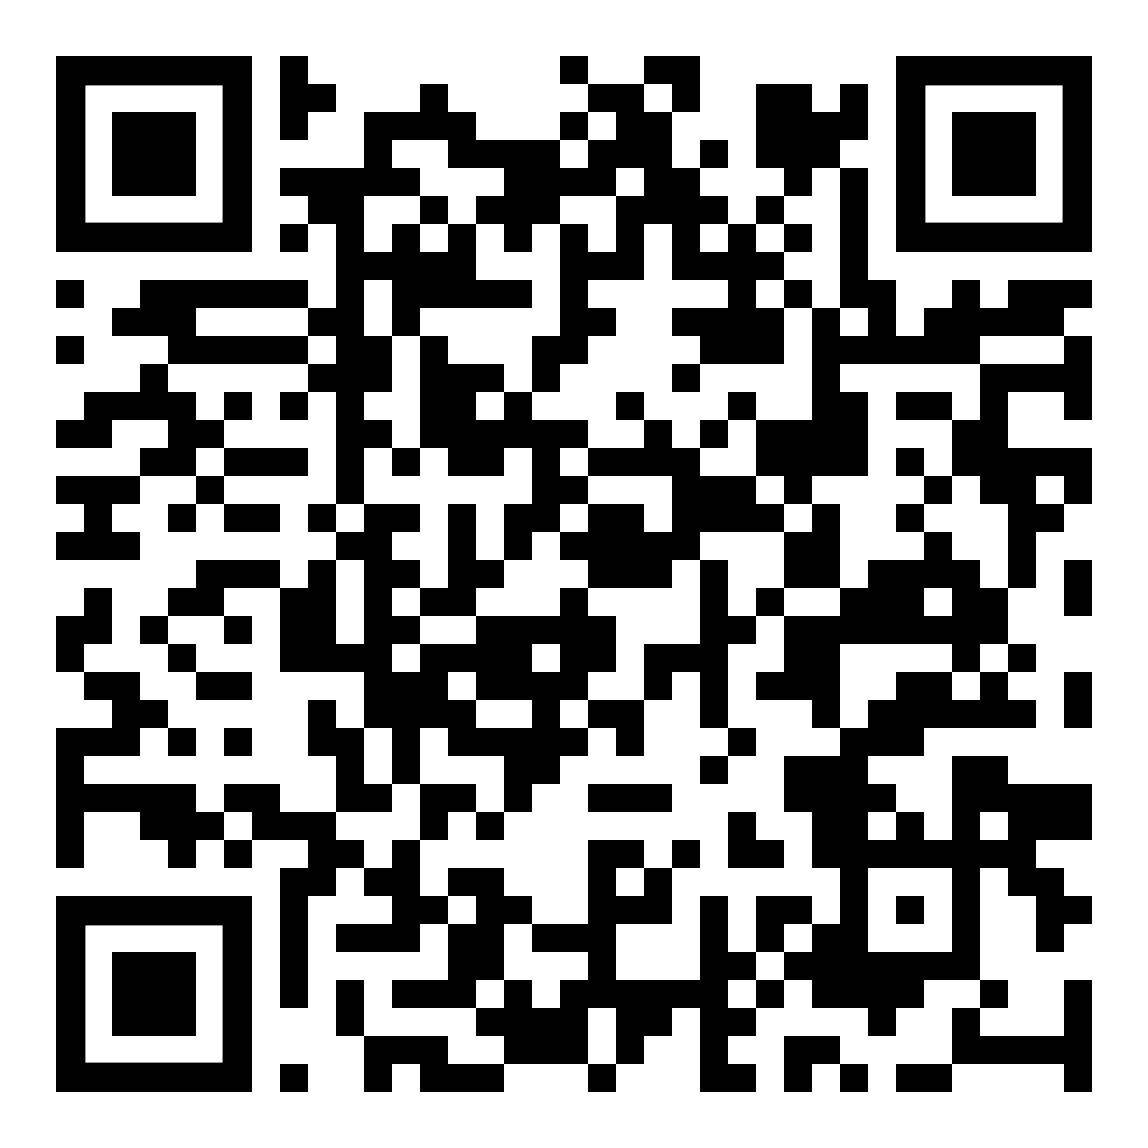 Scan to Register